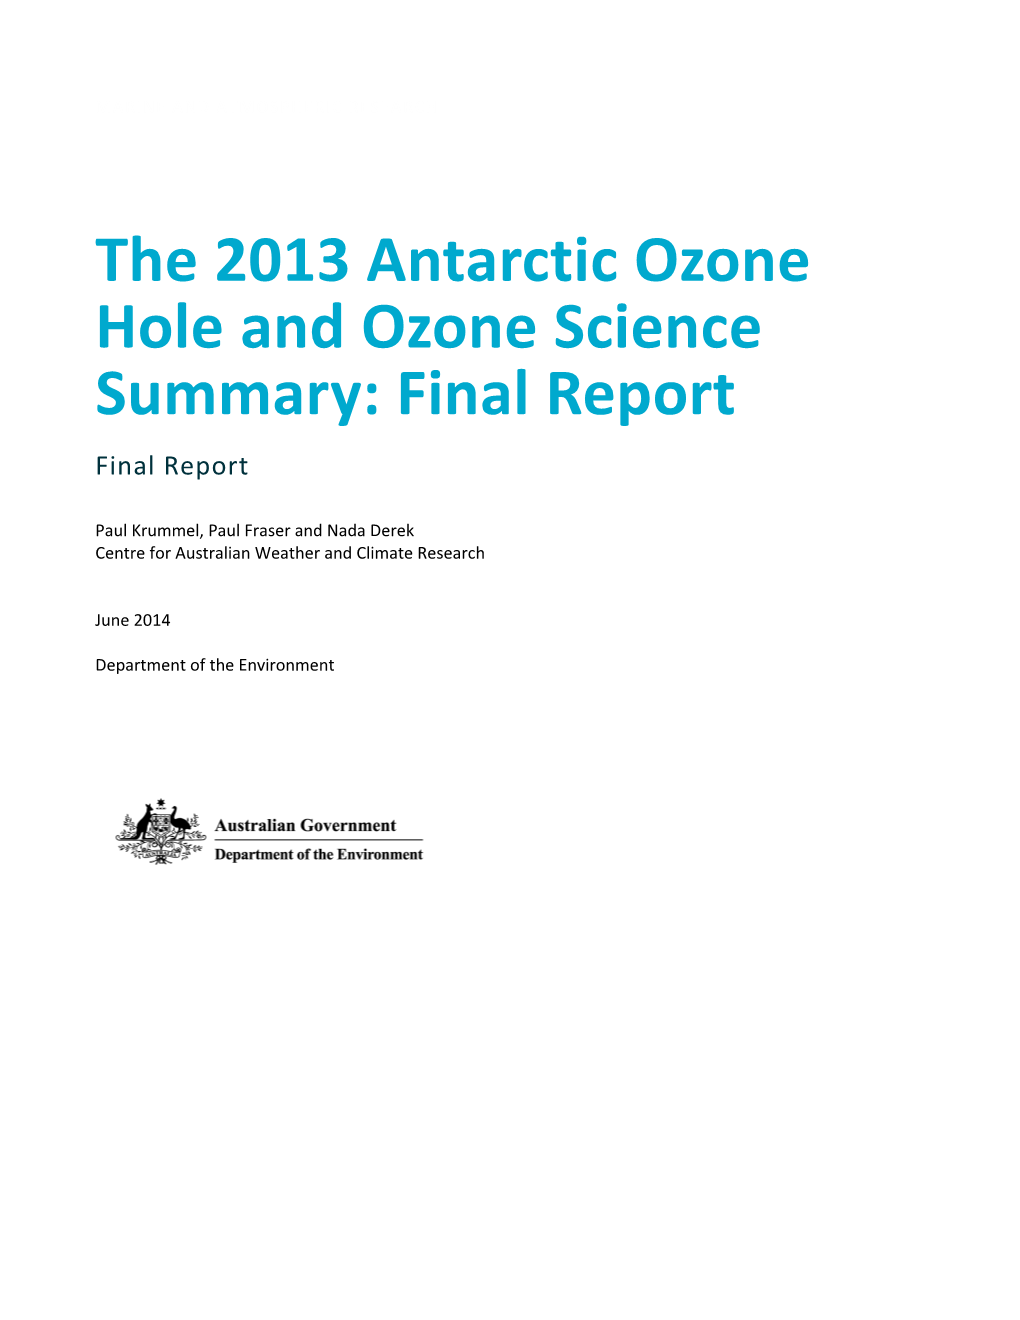 The 2013 Antarctic Ozone Hole and Ozone Science Summary: Final Report